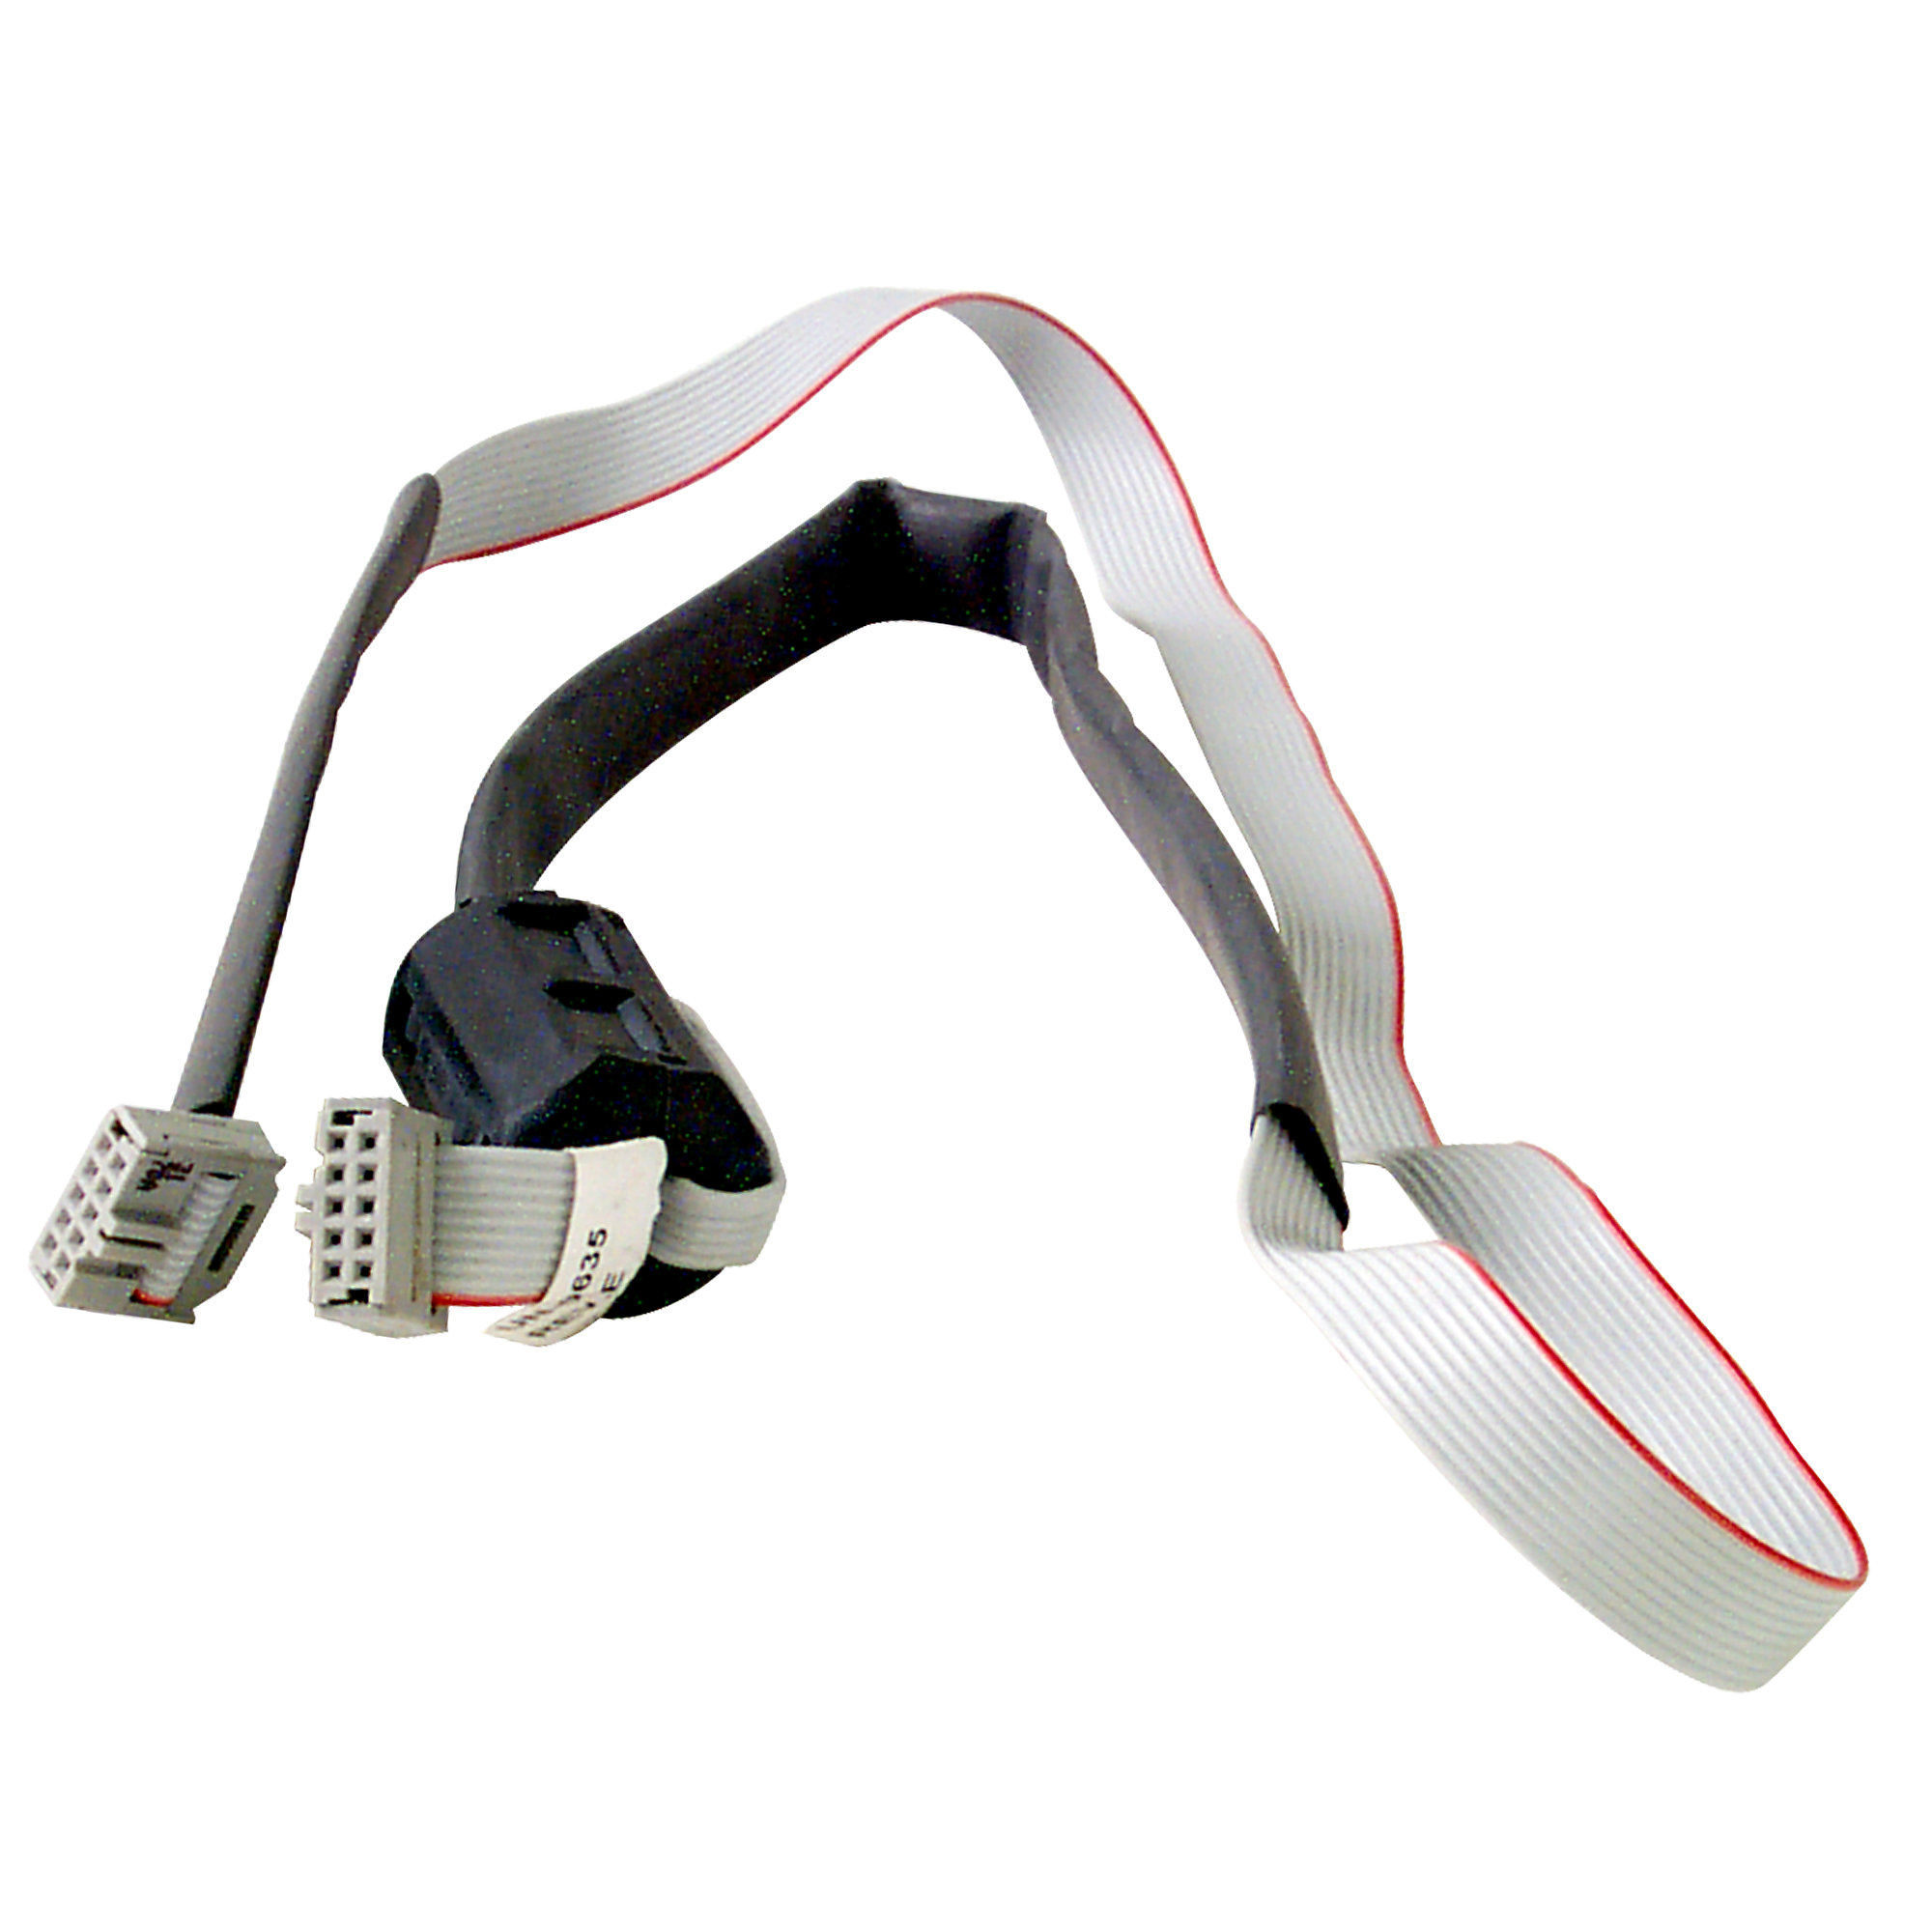 Upper Display Cable, M/M, Connects Display to Lower Display Cable